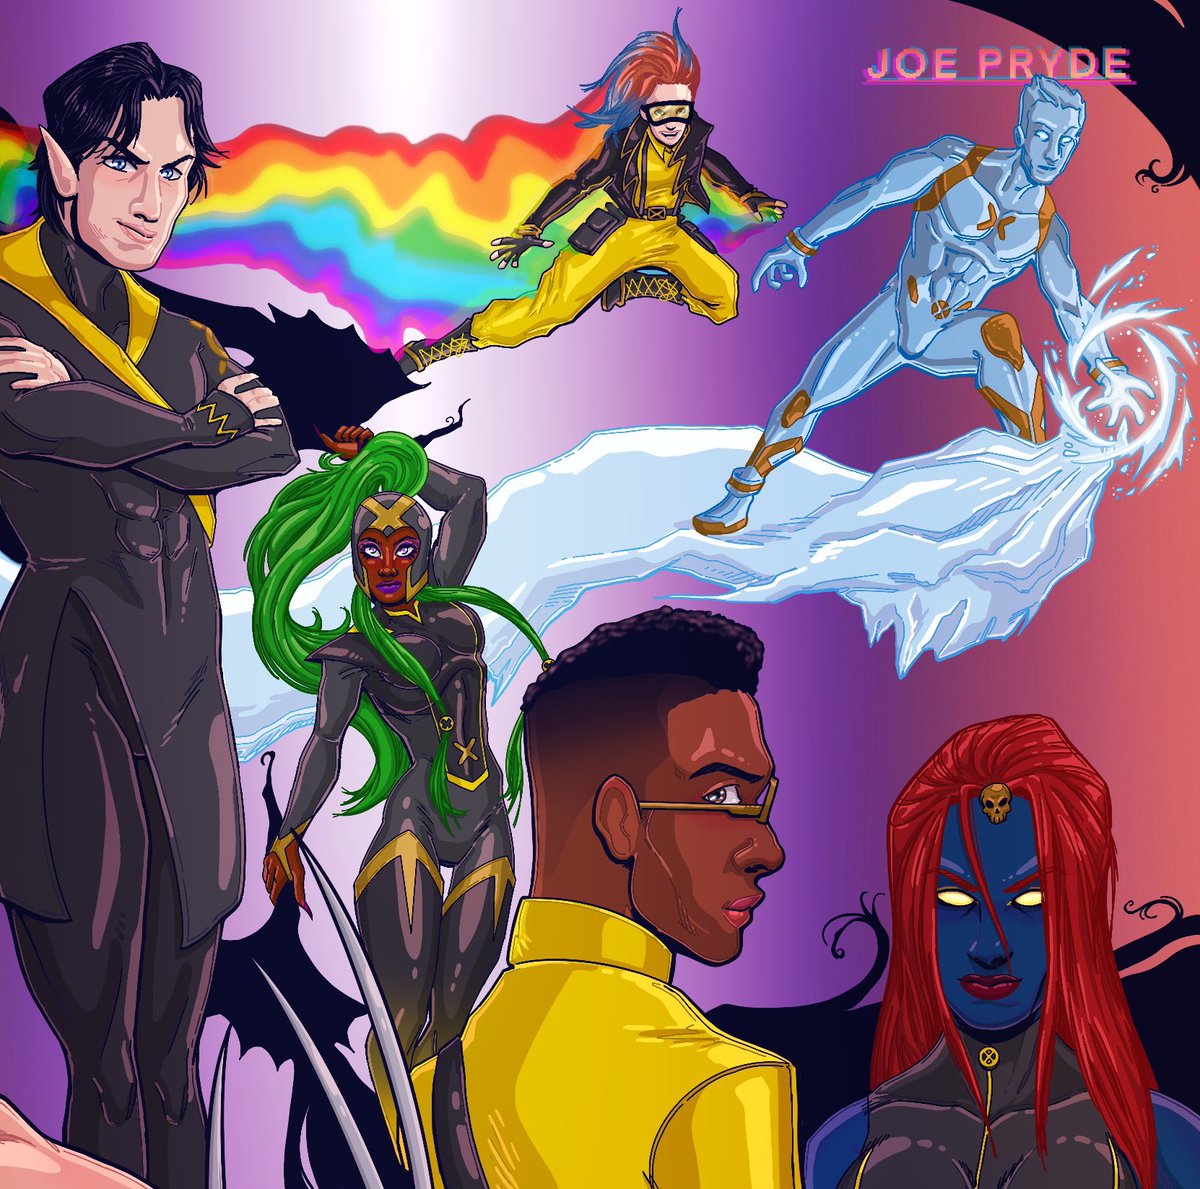 Happy Pride!! Debuting this piece I call “X-Pride” available as a print at QCon 06/17!! 

#Pride2023 #PrideMonth #xmen #xtwitter